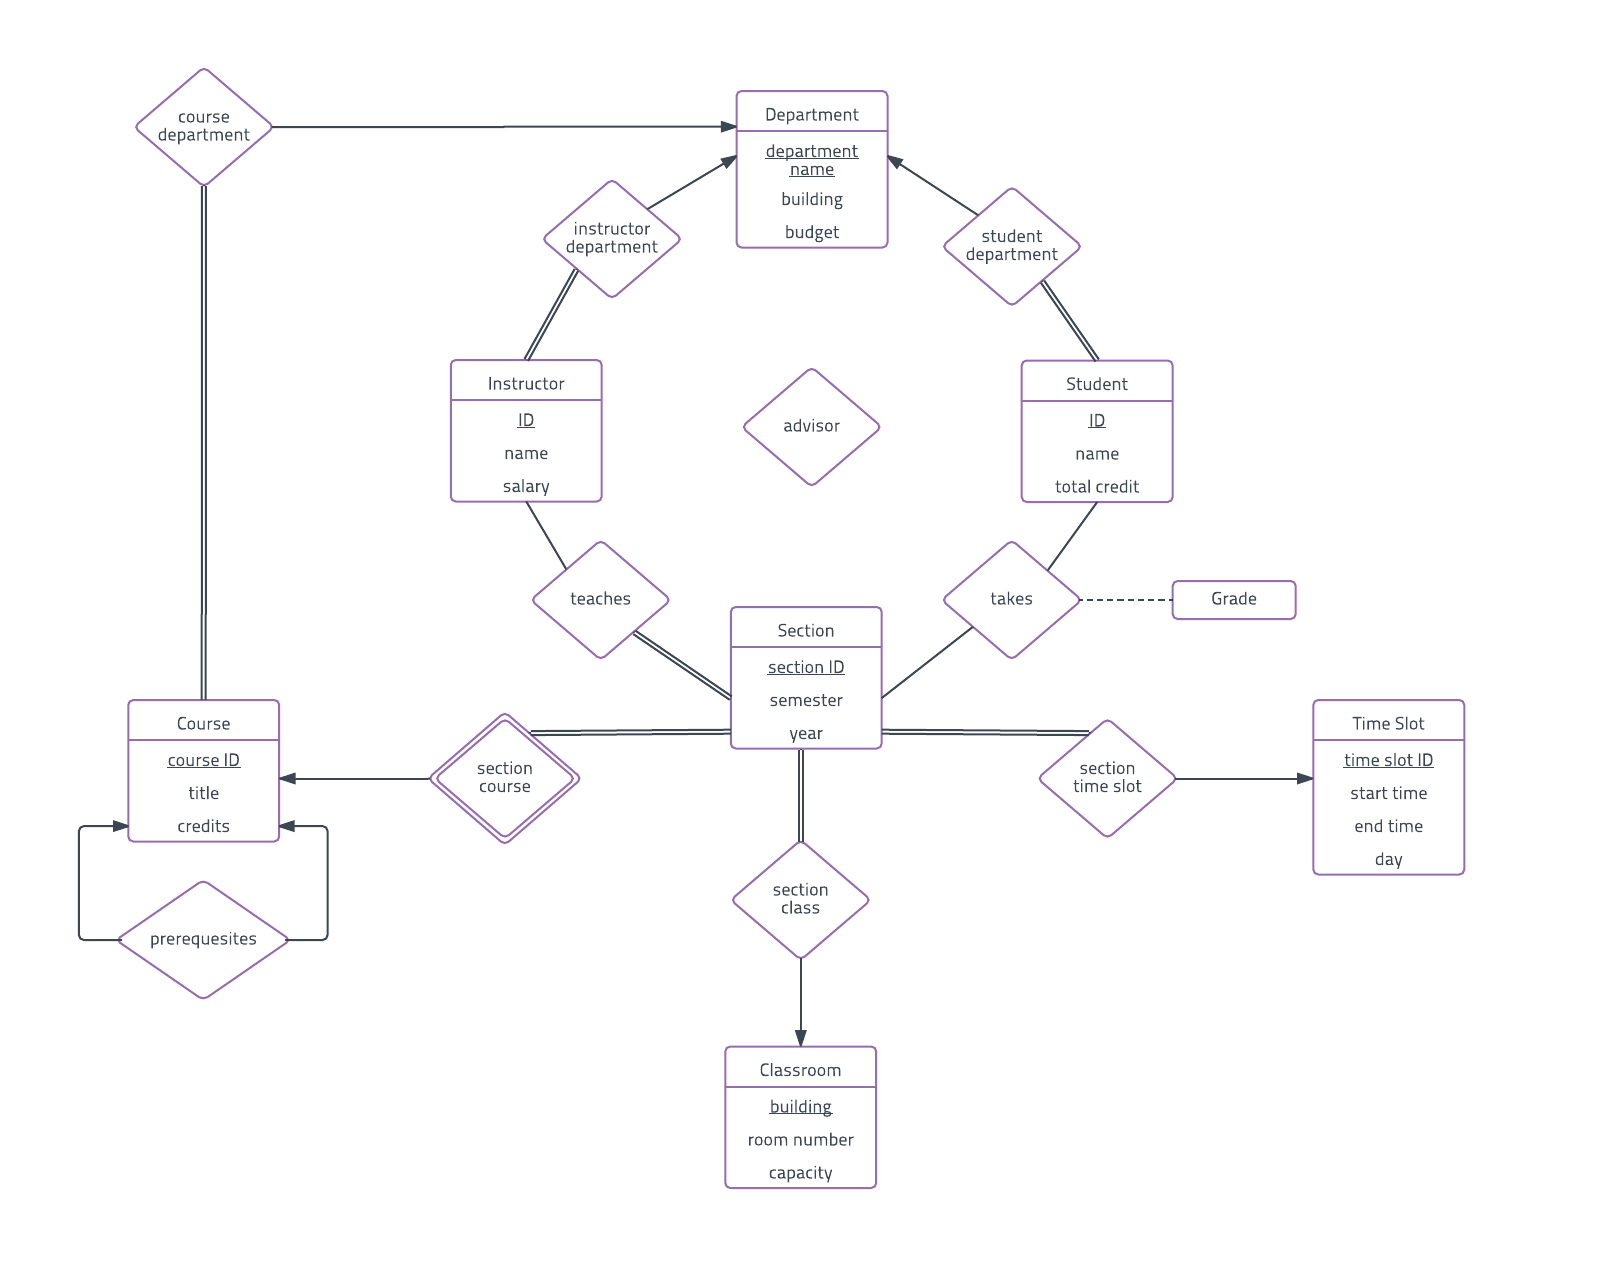 Er Diagram Examples And Templates | Lucidchart in Er Diagram Examples For Project Management System